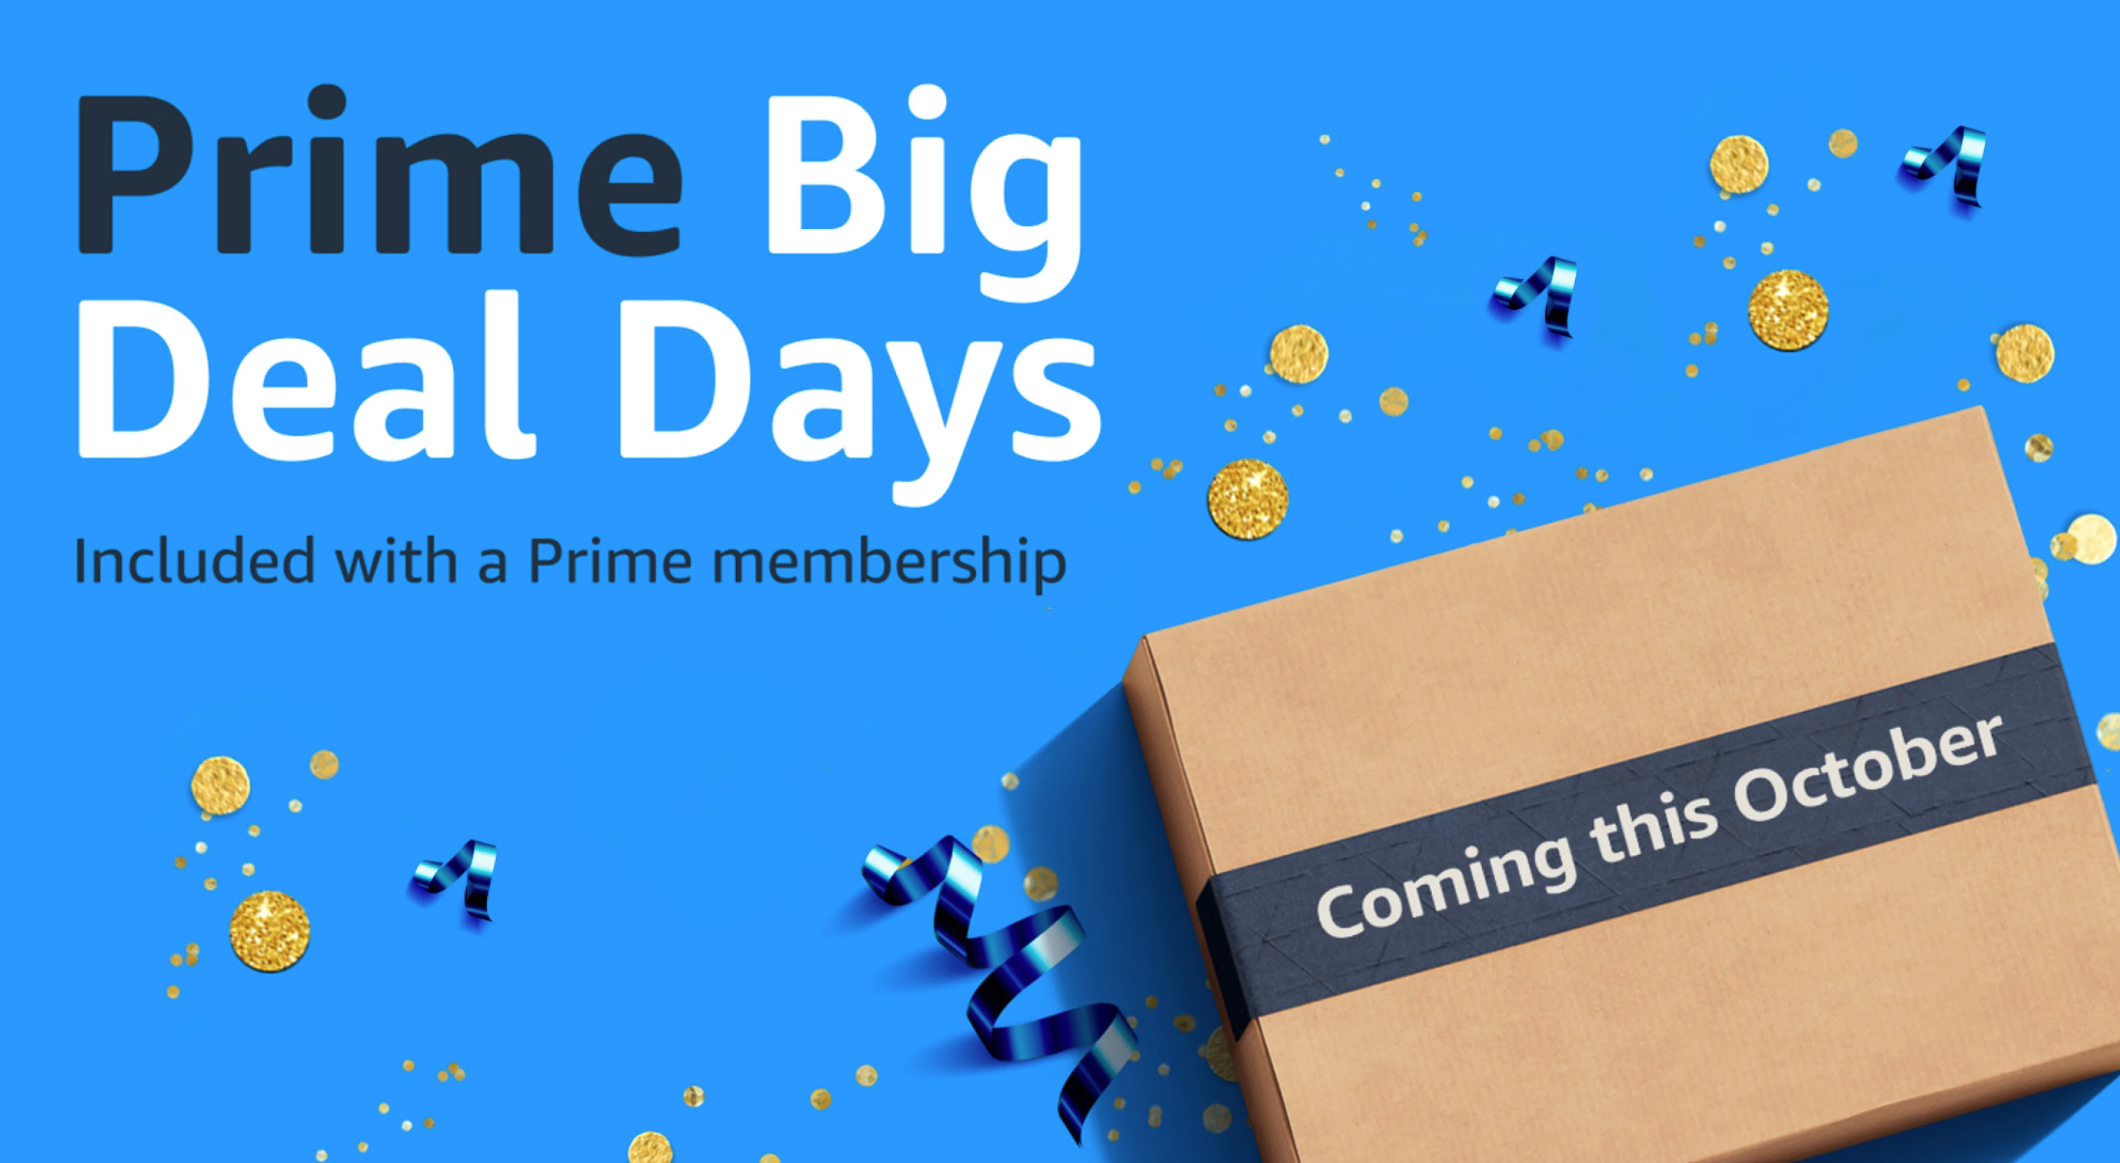 Walmart battles  Prime Day: Here's what you need to know about the  'Holiday Kickoff Sale' 